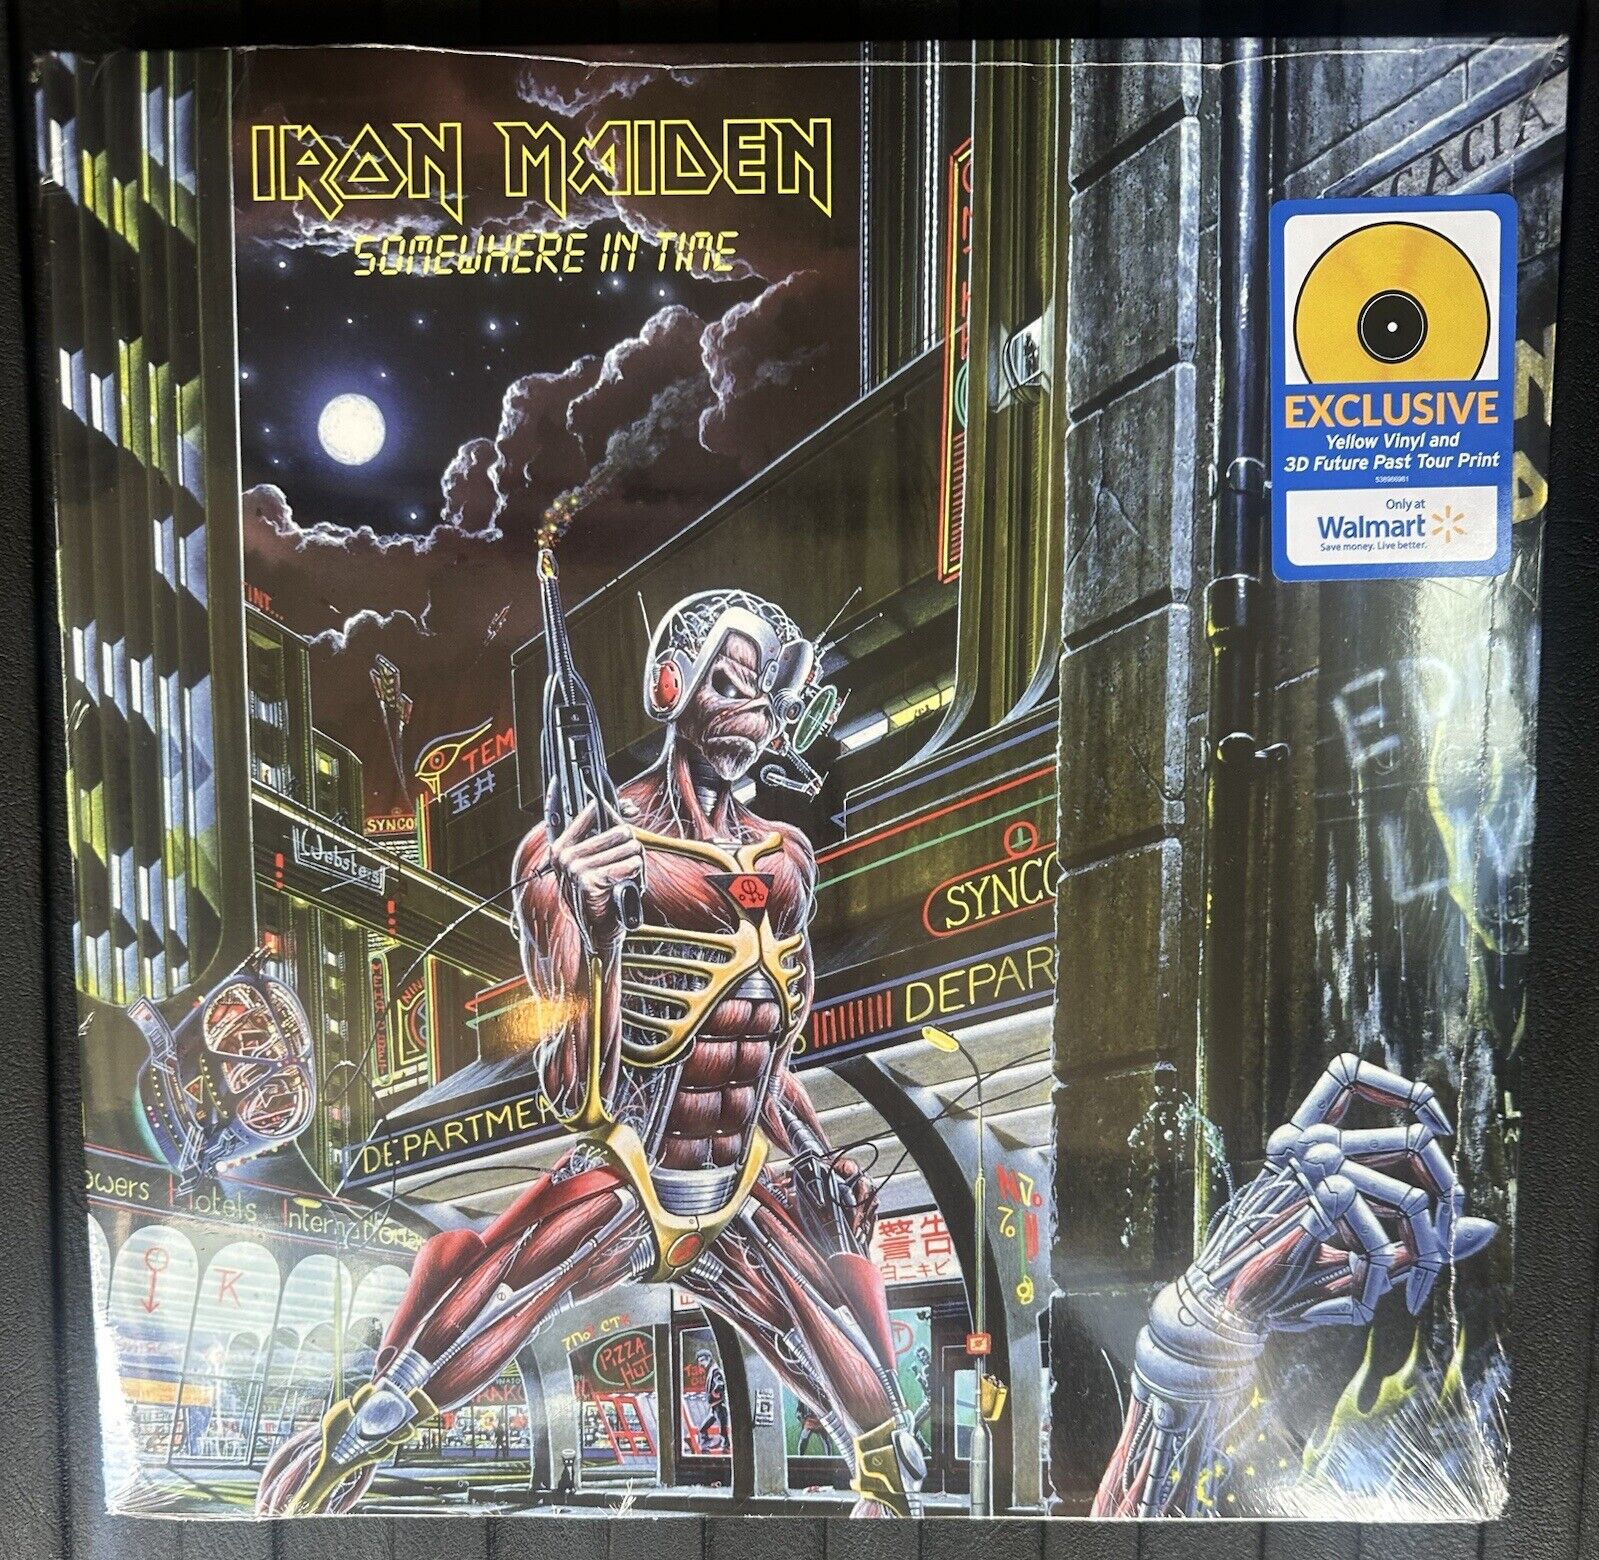 Iron Maiden Somewhere In Time Presale Canary Yellow Colored Vinyl LP + Print